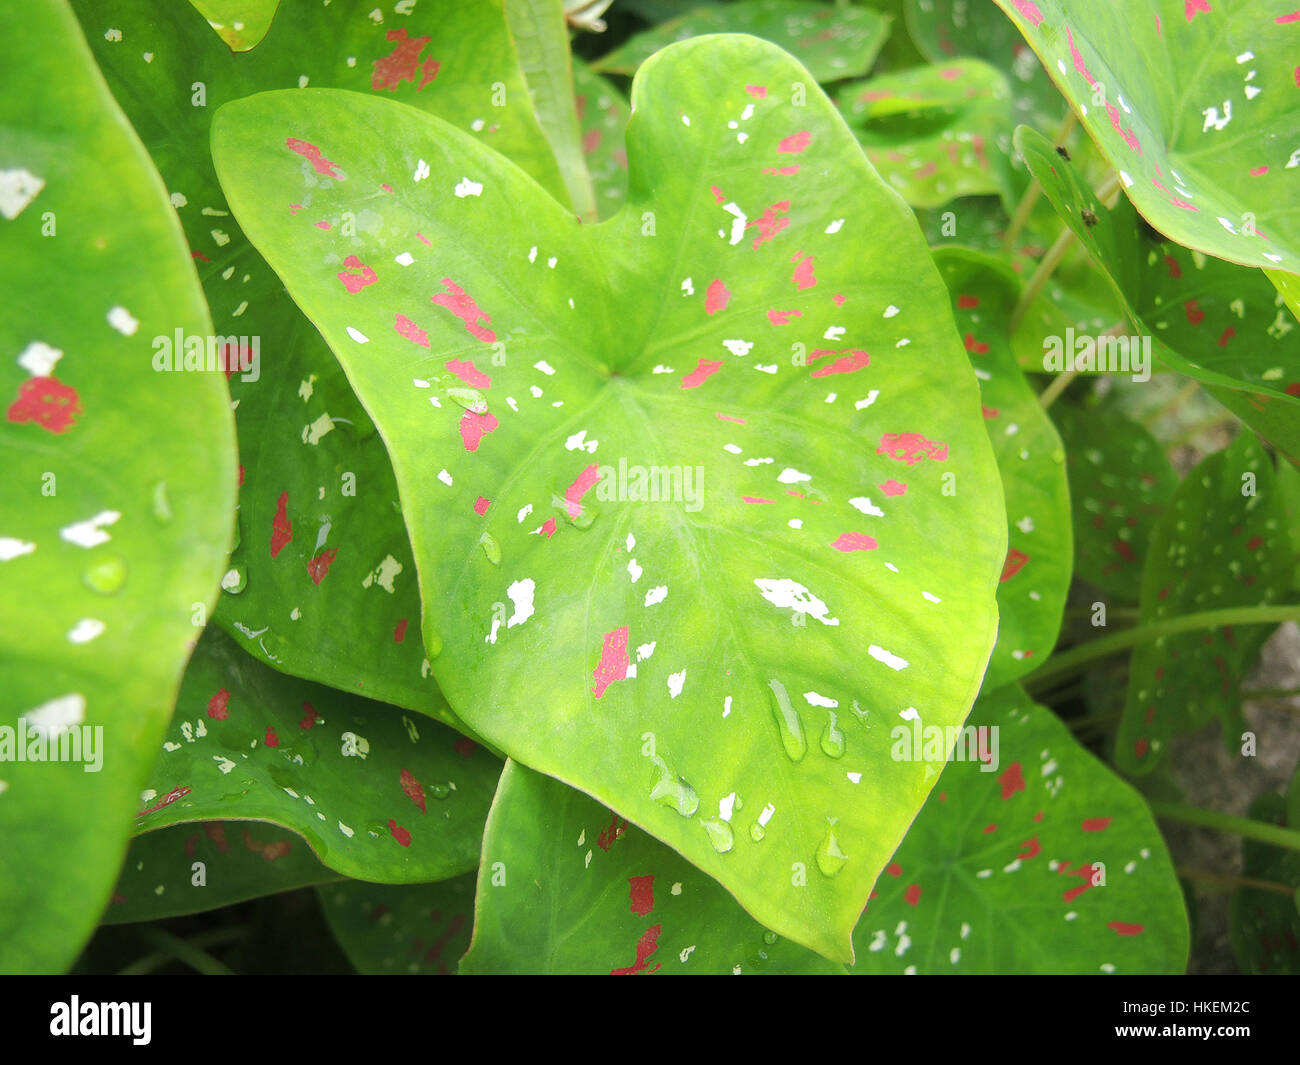 Caladium (queen of the leaf plant) in the nature botanical garden Stock Photo